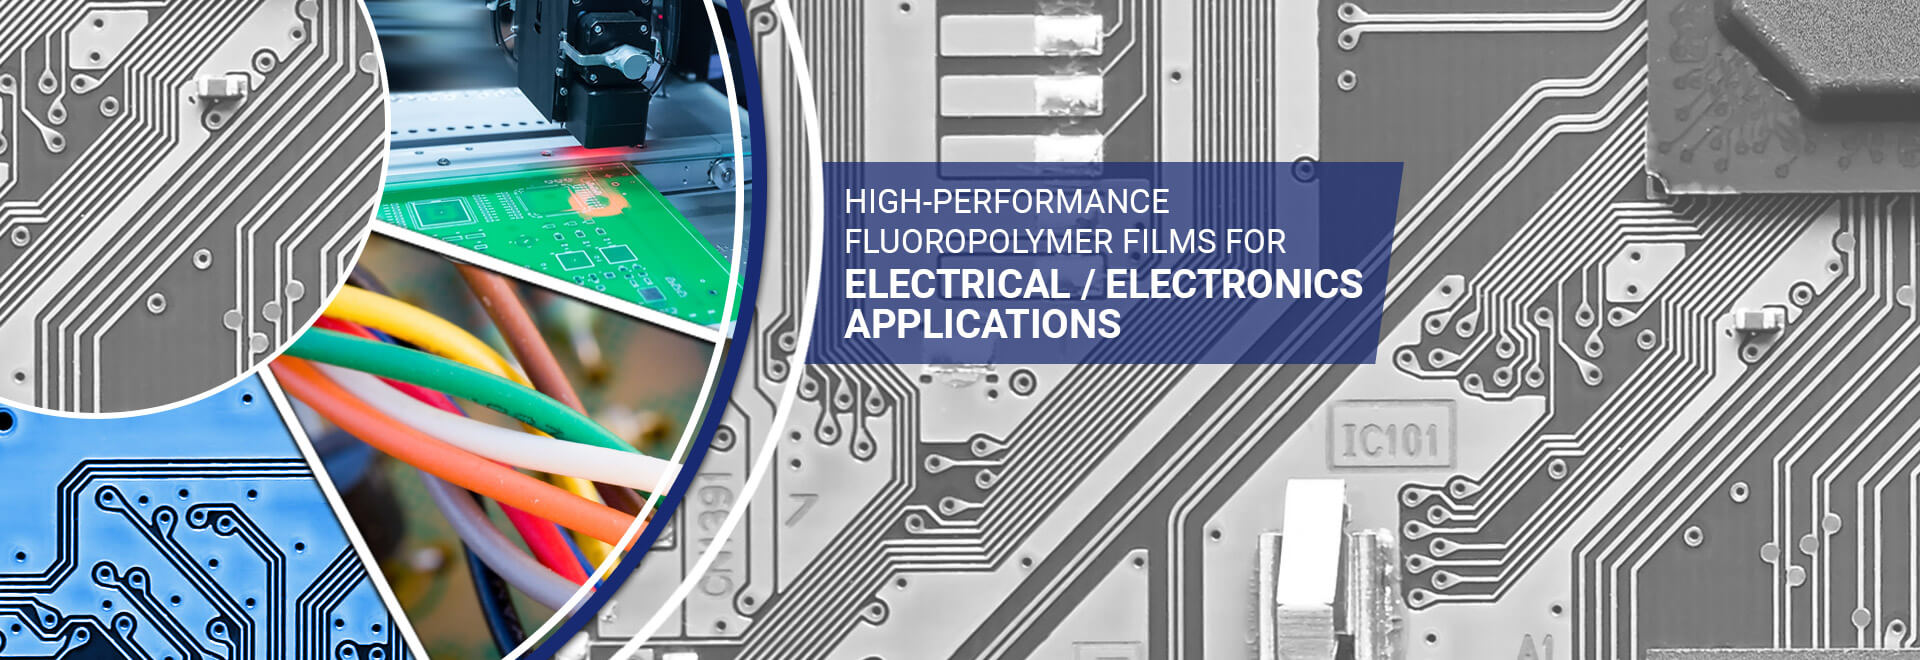 FEP, PFA, ETFE, cast PTFE film, fluoropolymer films, high performance fluoropolymer films, fep film, pfa film, etfe film, semiconductor, dielectric properties, circuit board, film assisted molding, integrated circuits